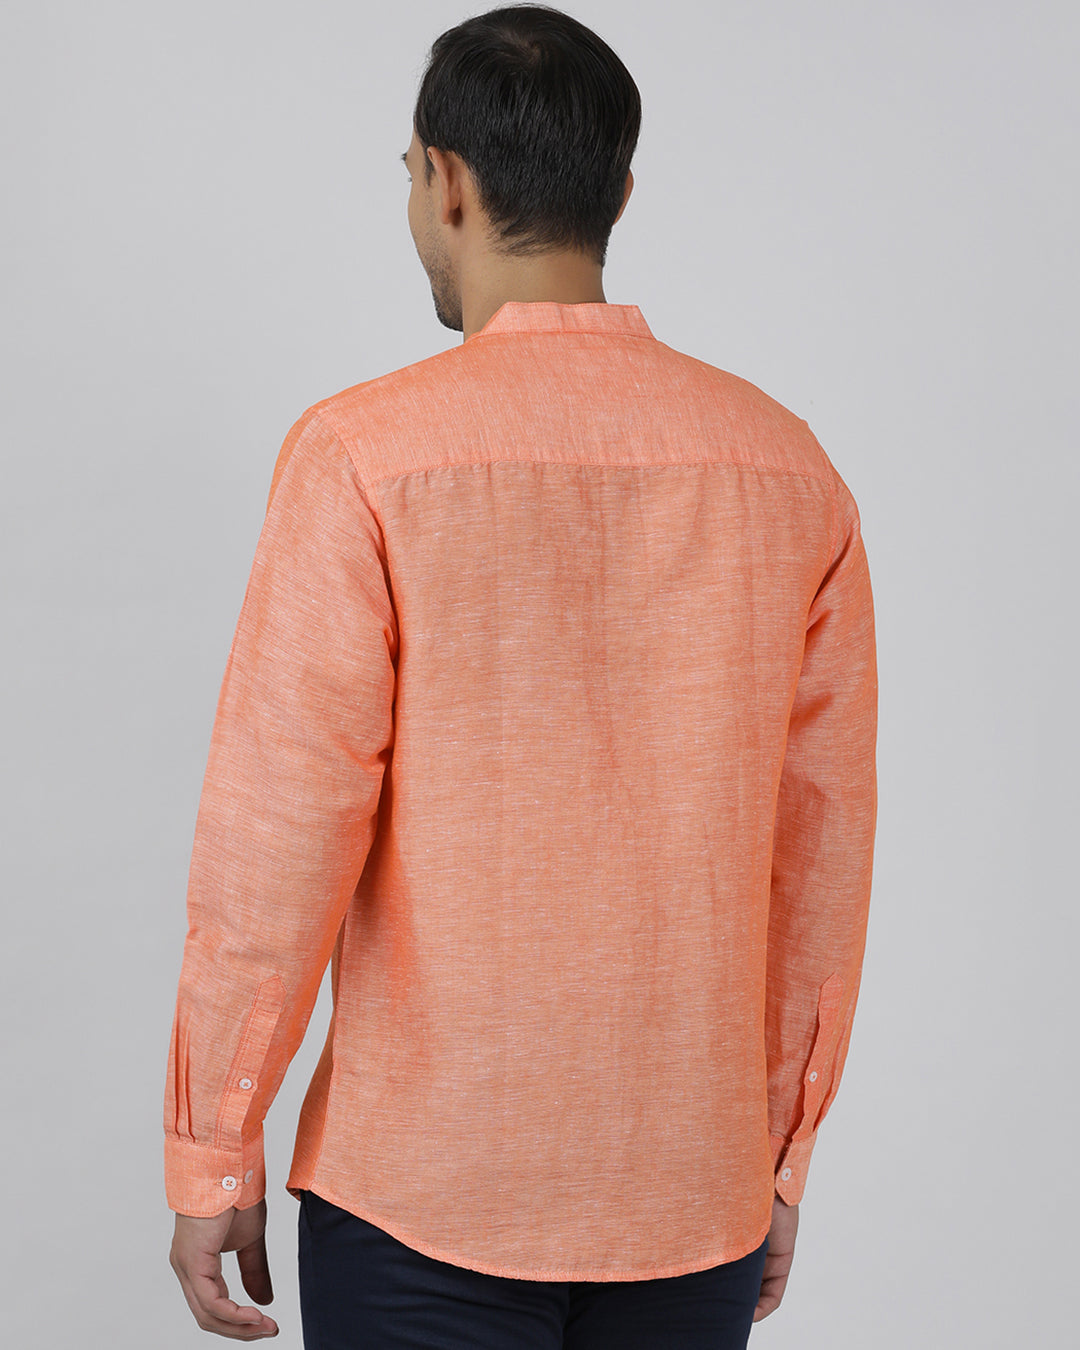 Casual Orange Full Sleeve Regular Fit Solid Shirt with Collar for Men